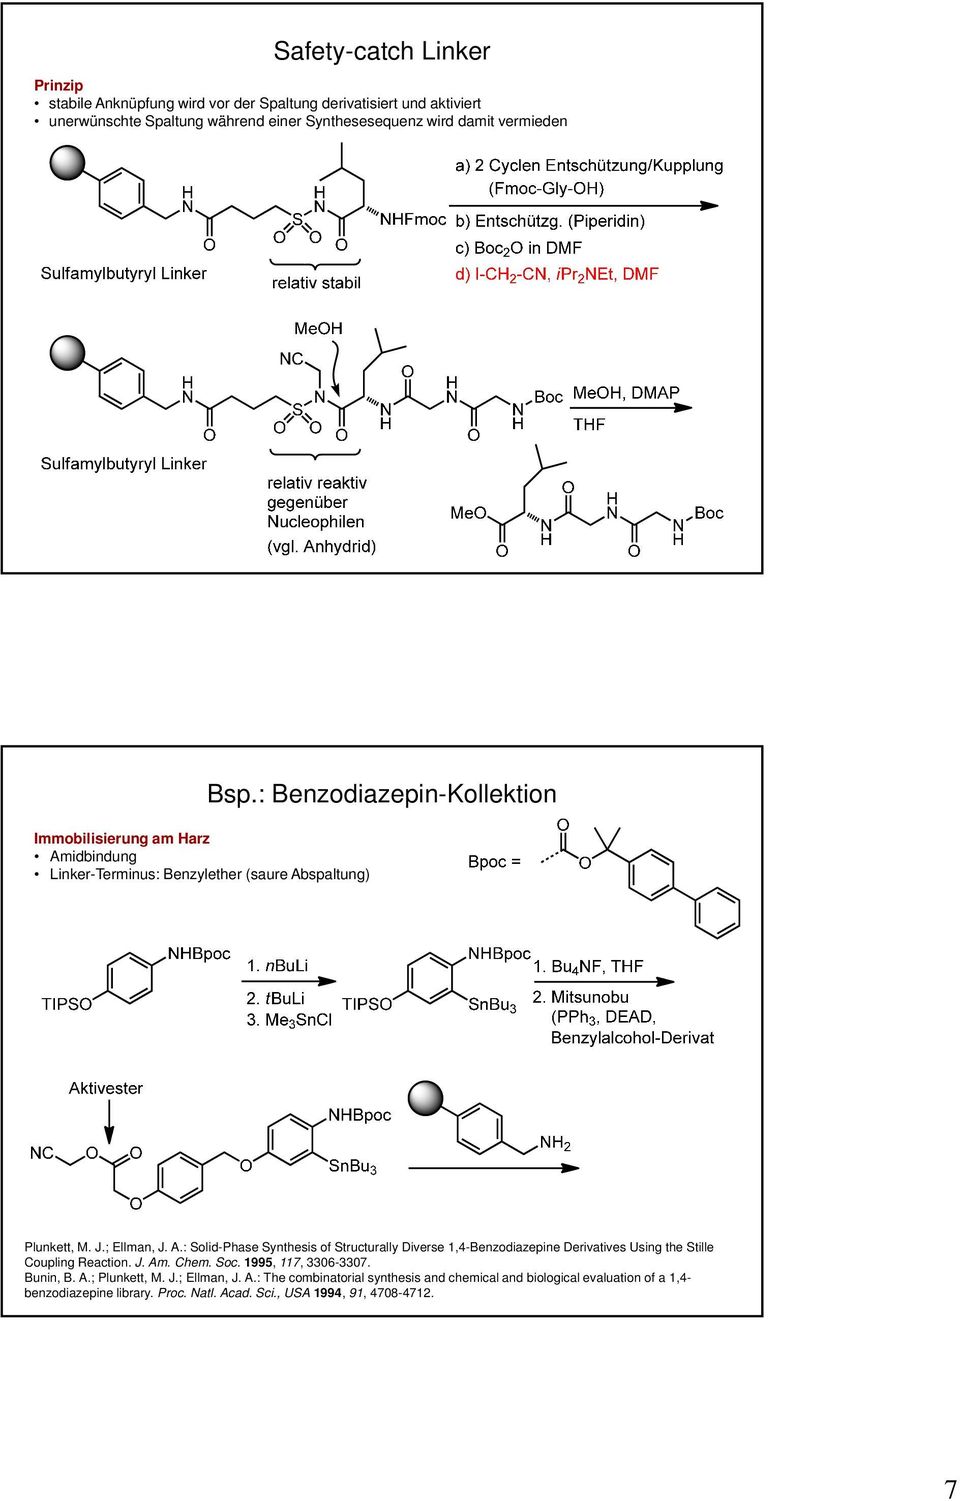 J. Am. Chem. Soc. 1995, 117, 3306-3307. Bunin, B. A.; Plunkett, M. J.; Ellman, J. A.: The combinatorial synthesis and chemical and biological evaluation of a 1,4- benzodiazepine library.